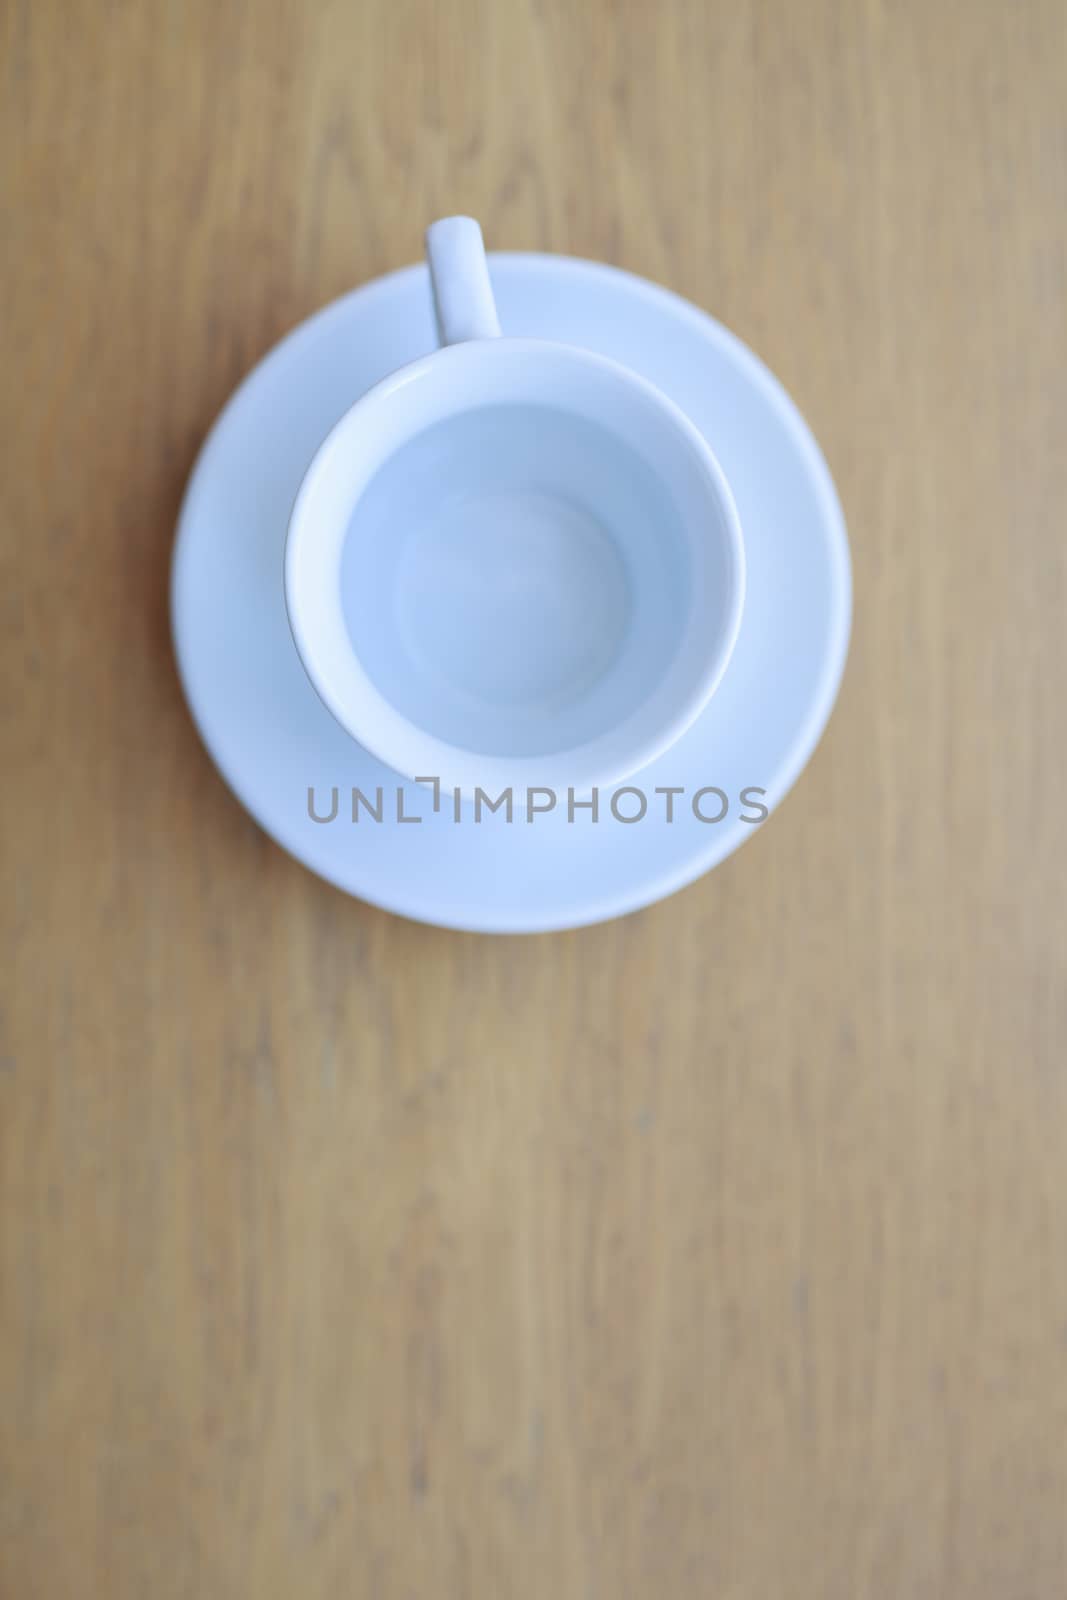 one pure white ceramic Cup and saucer without drink sits on a wooden table in the afternoon sunlight the view from the top